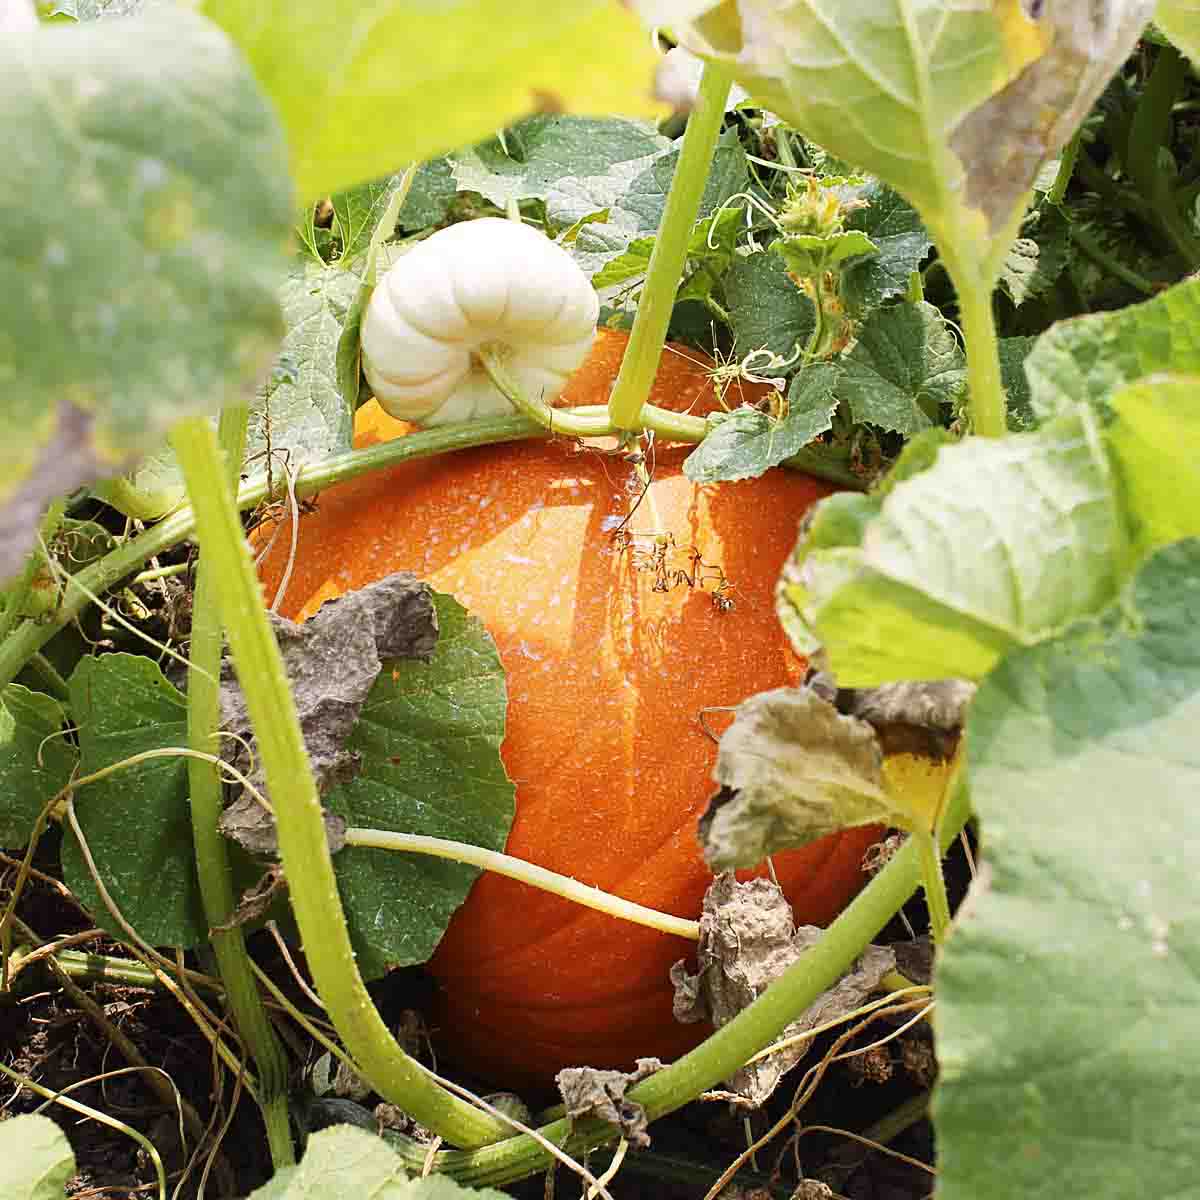 Small white pumpkin vines over the top of large orange pumpkin.